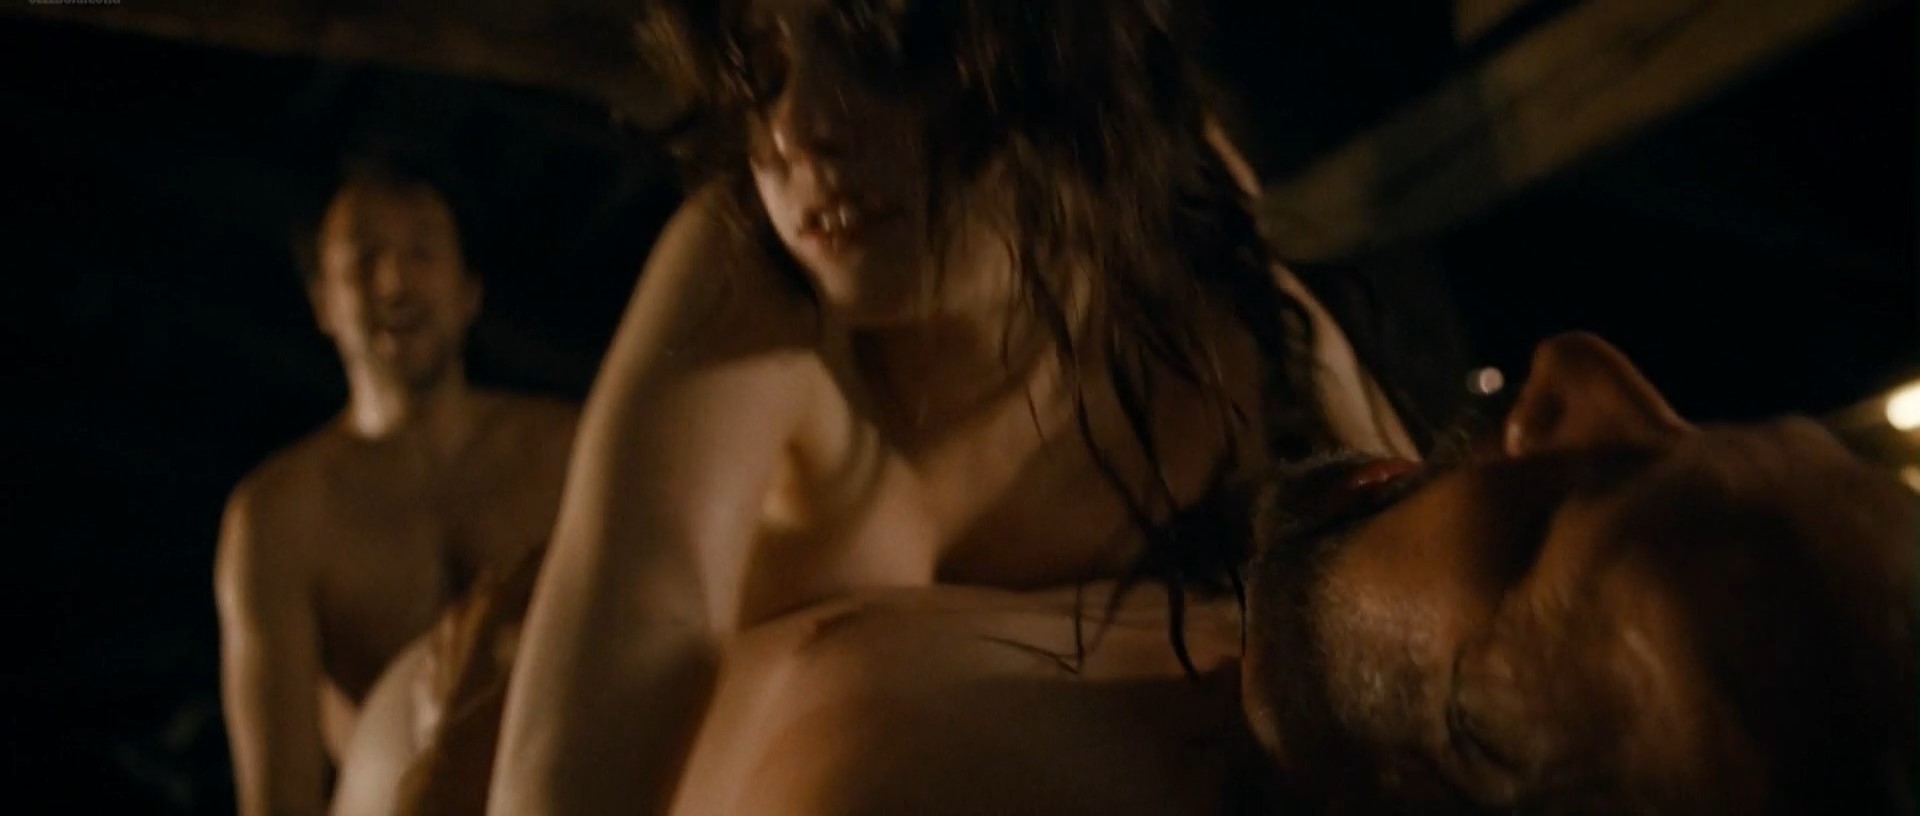 Naked Roxanne MCKEE in Dominion ANCENSORED.